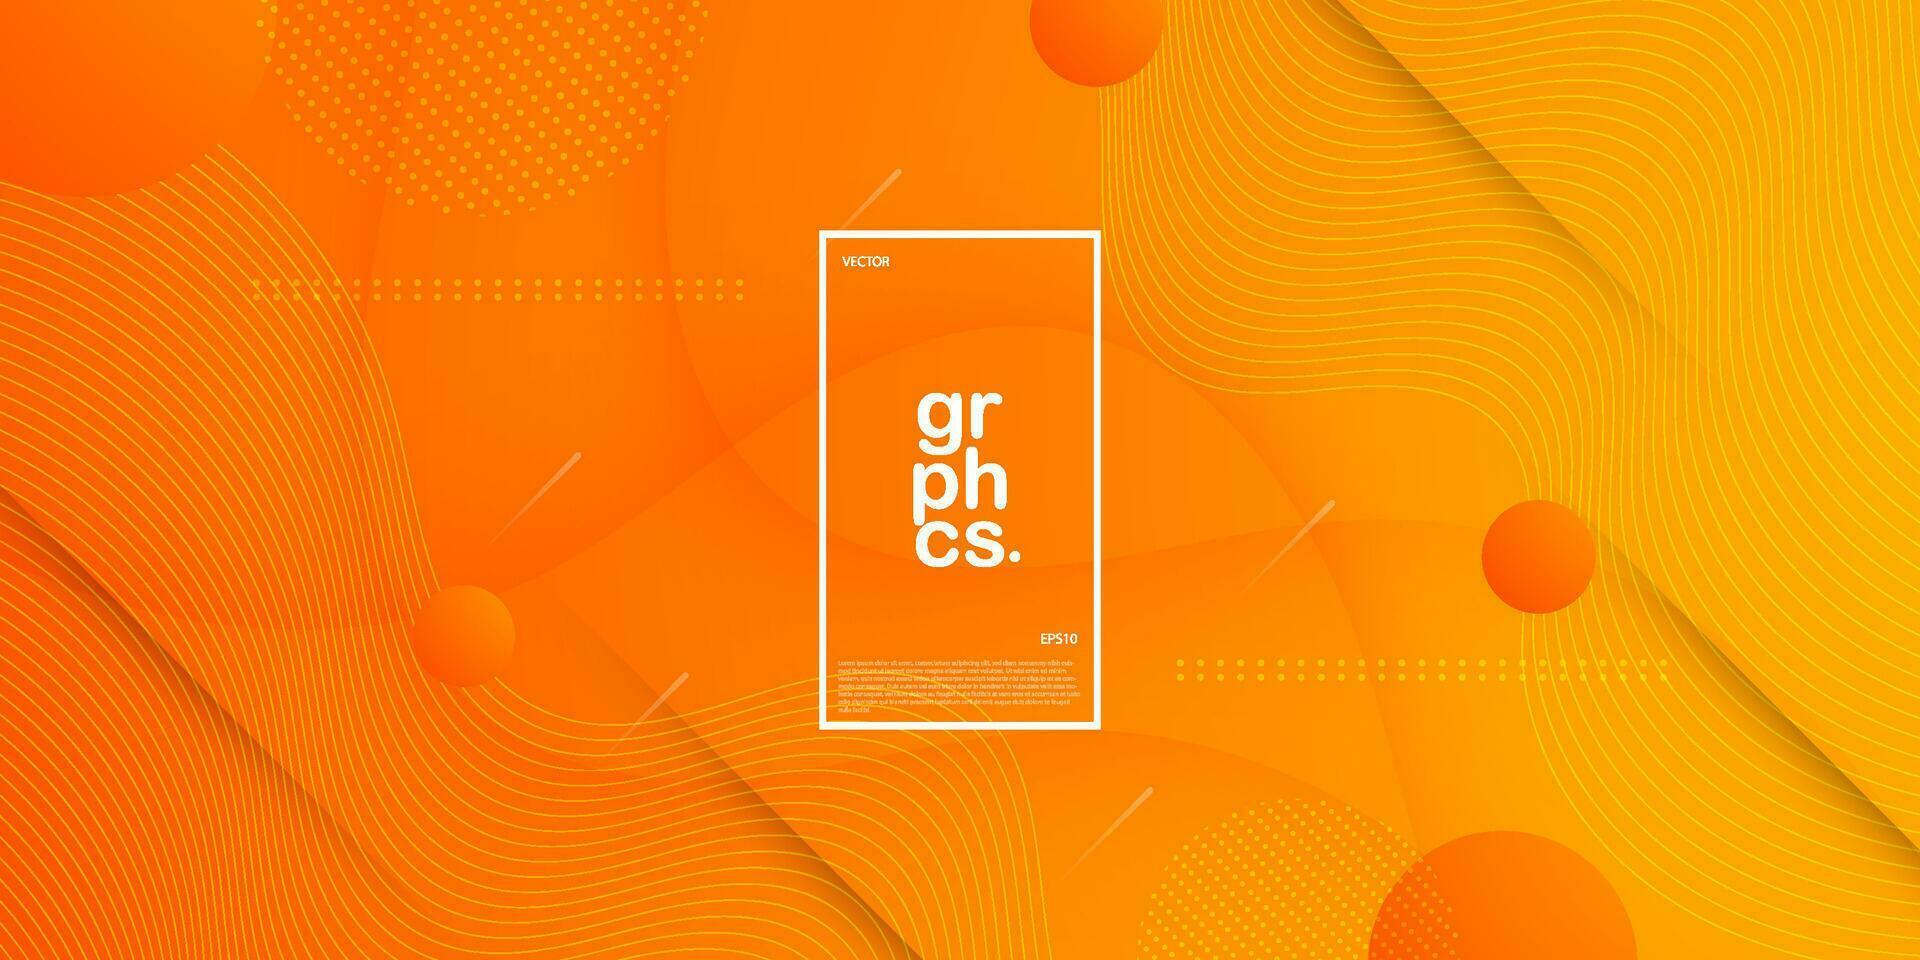 Bright orange abstract background with simple shapes and wavy lines. Trendy and colorful orange design. popular and modern with shadow 3d concept. Eps10 vector